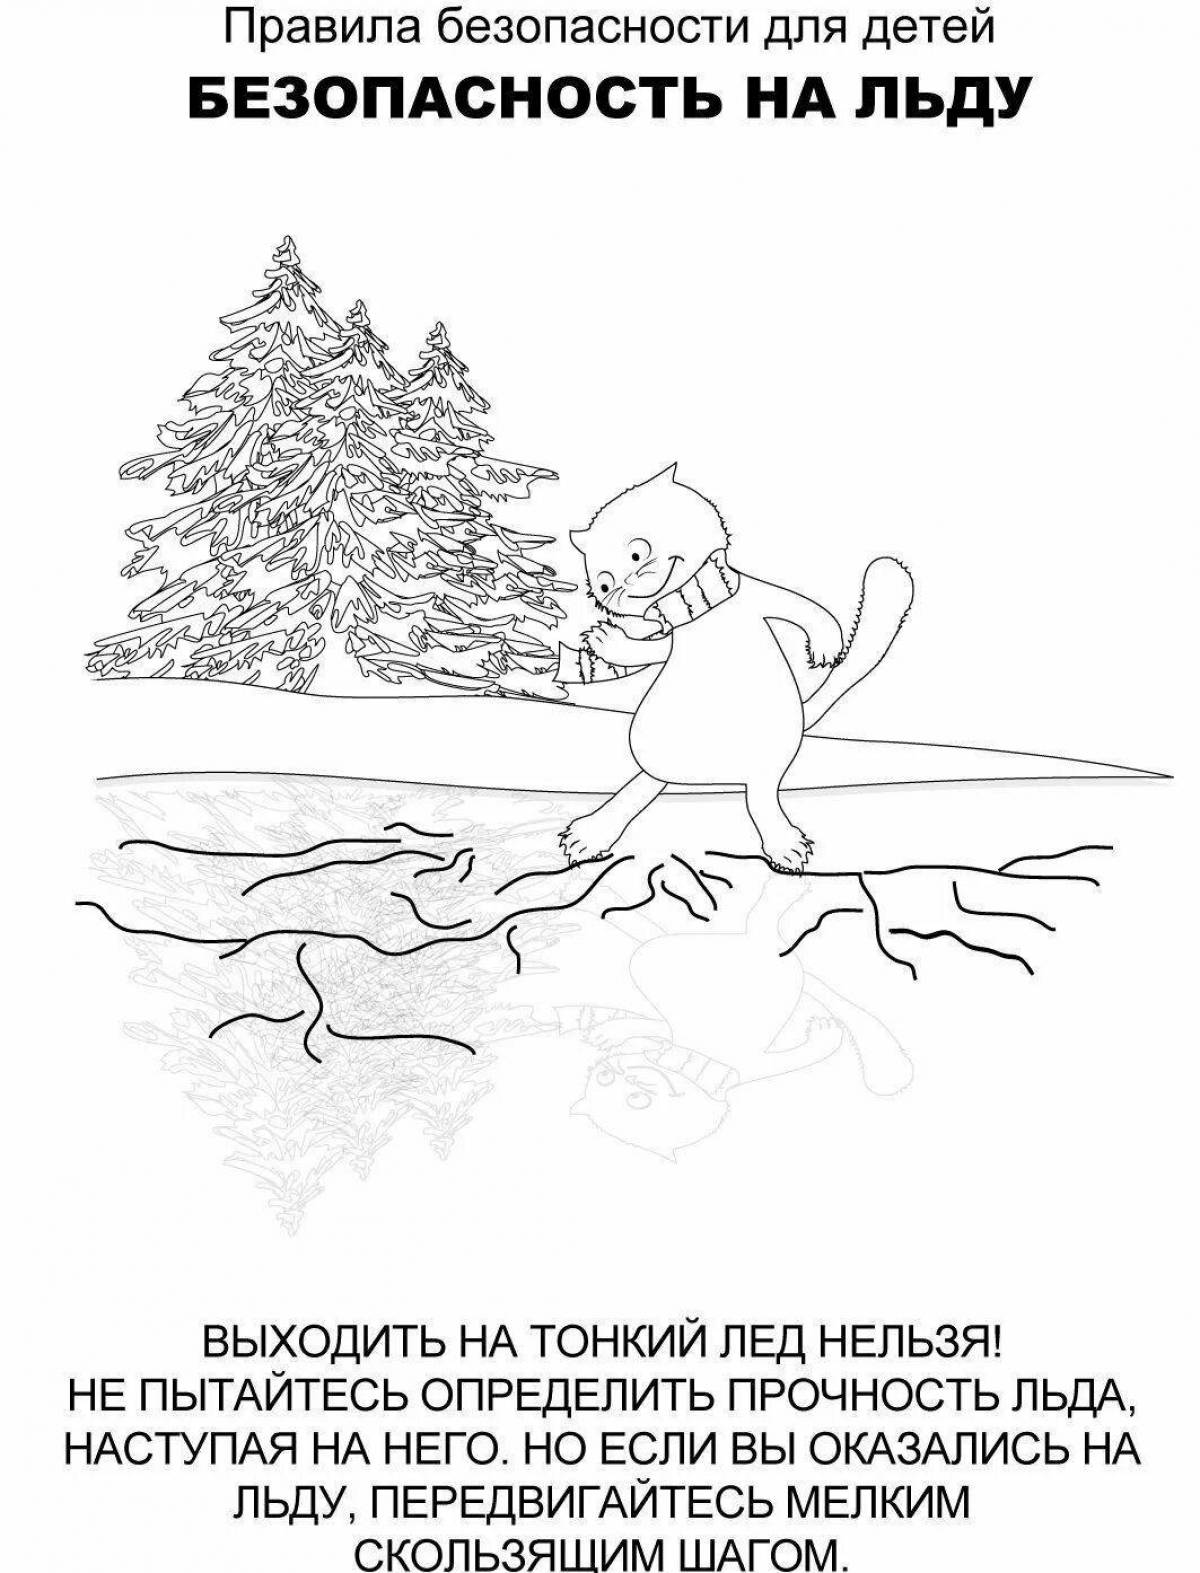 Winter safety promotion coloring page